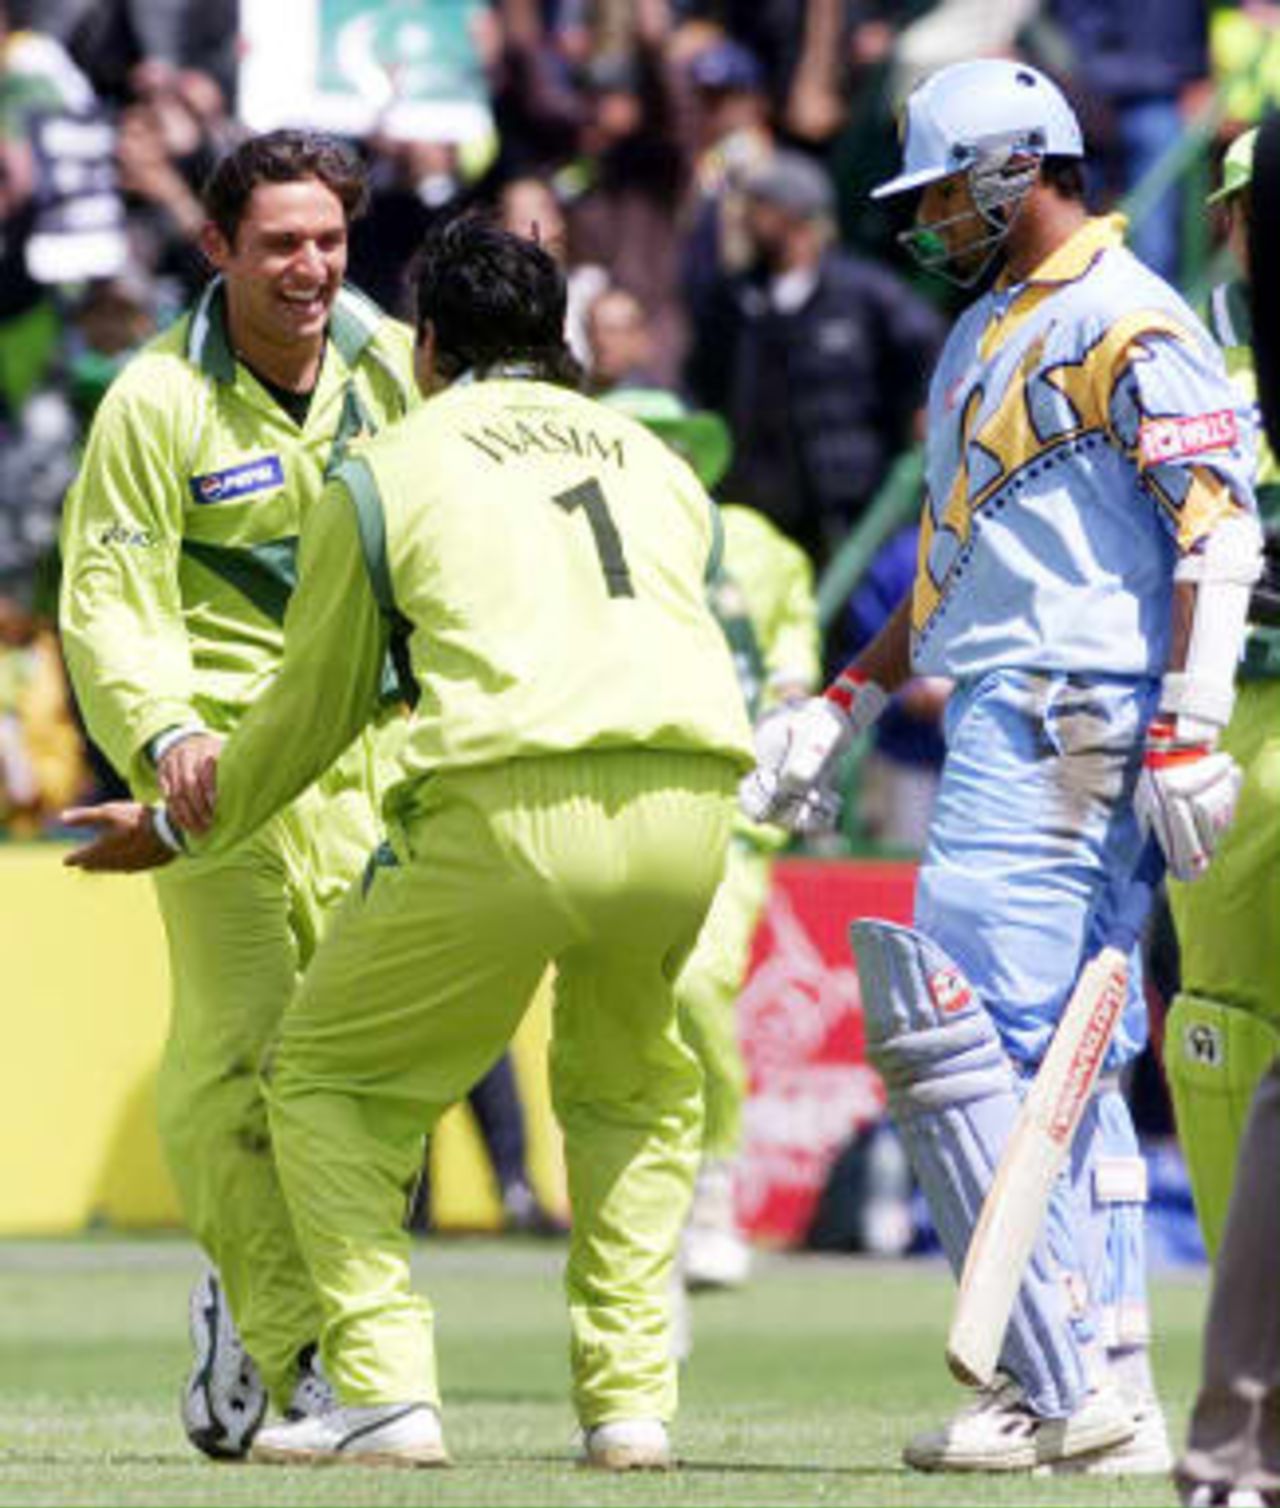 India's Rahul Dravid (R) walks to the pavilion as Pakistan bowler Wasim Akram (C) jubilates with catcher Shahid Afridi 08 June 1999 during their Cricket World Cup match at Old Trafford, Manchester